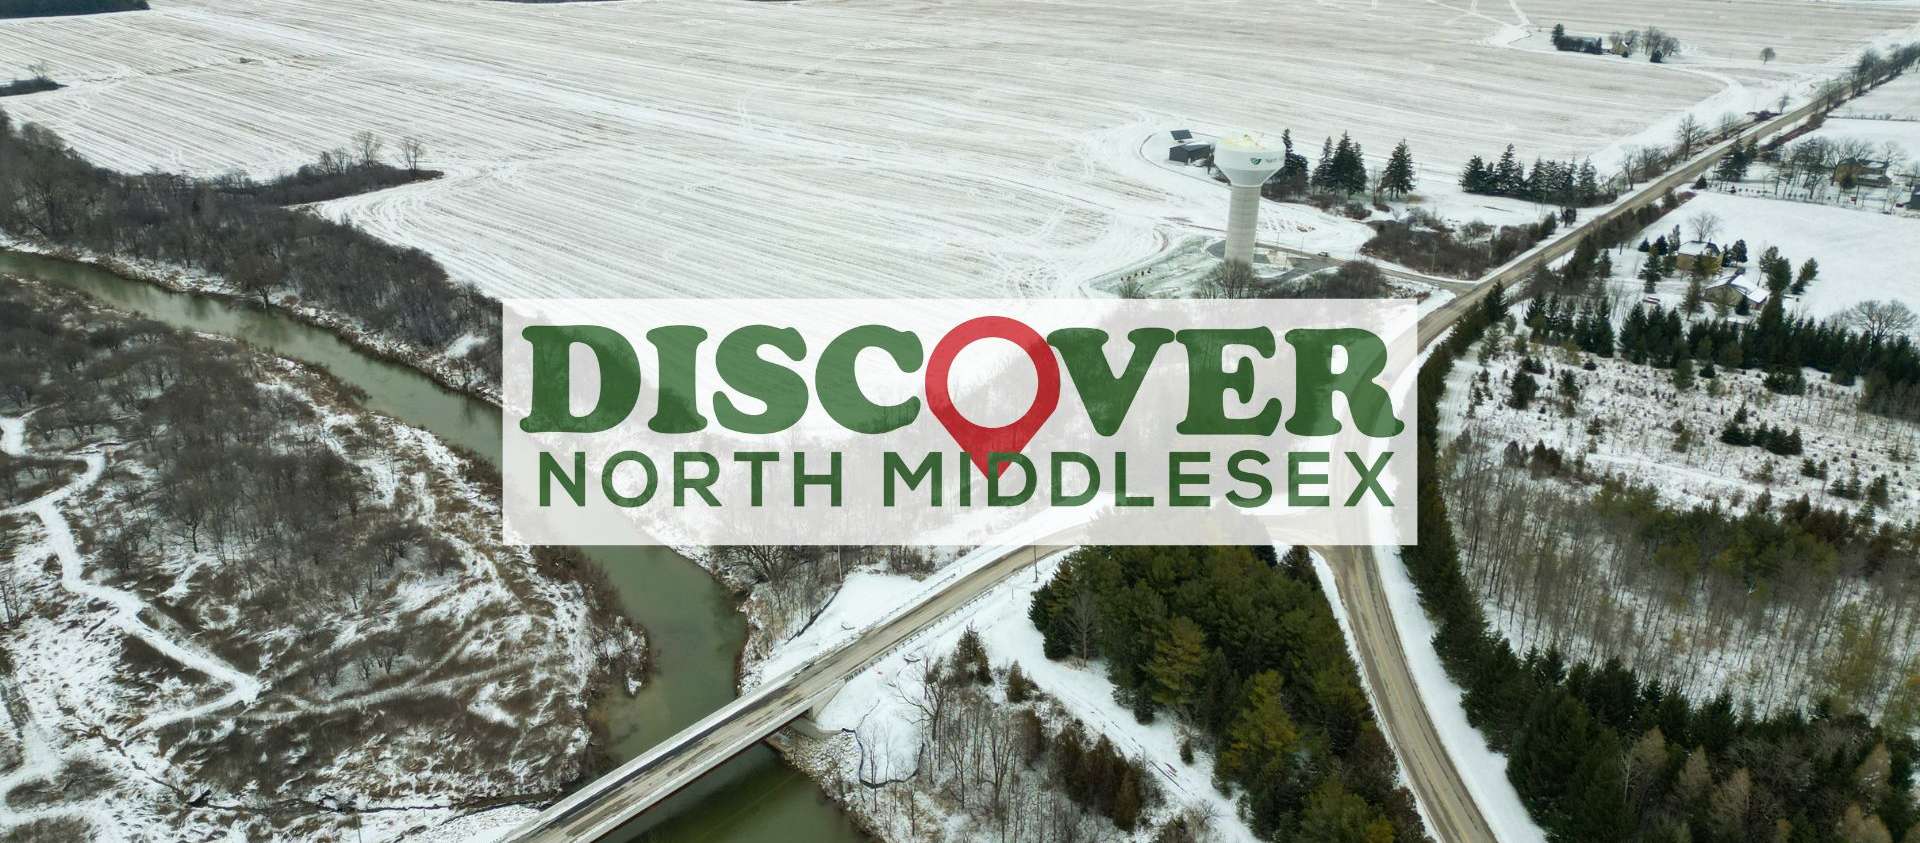 Discover North Middlesex 2024